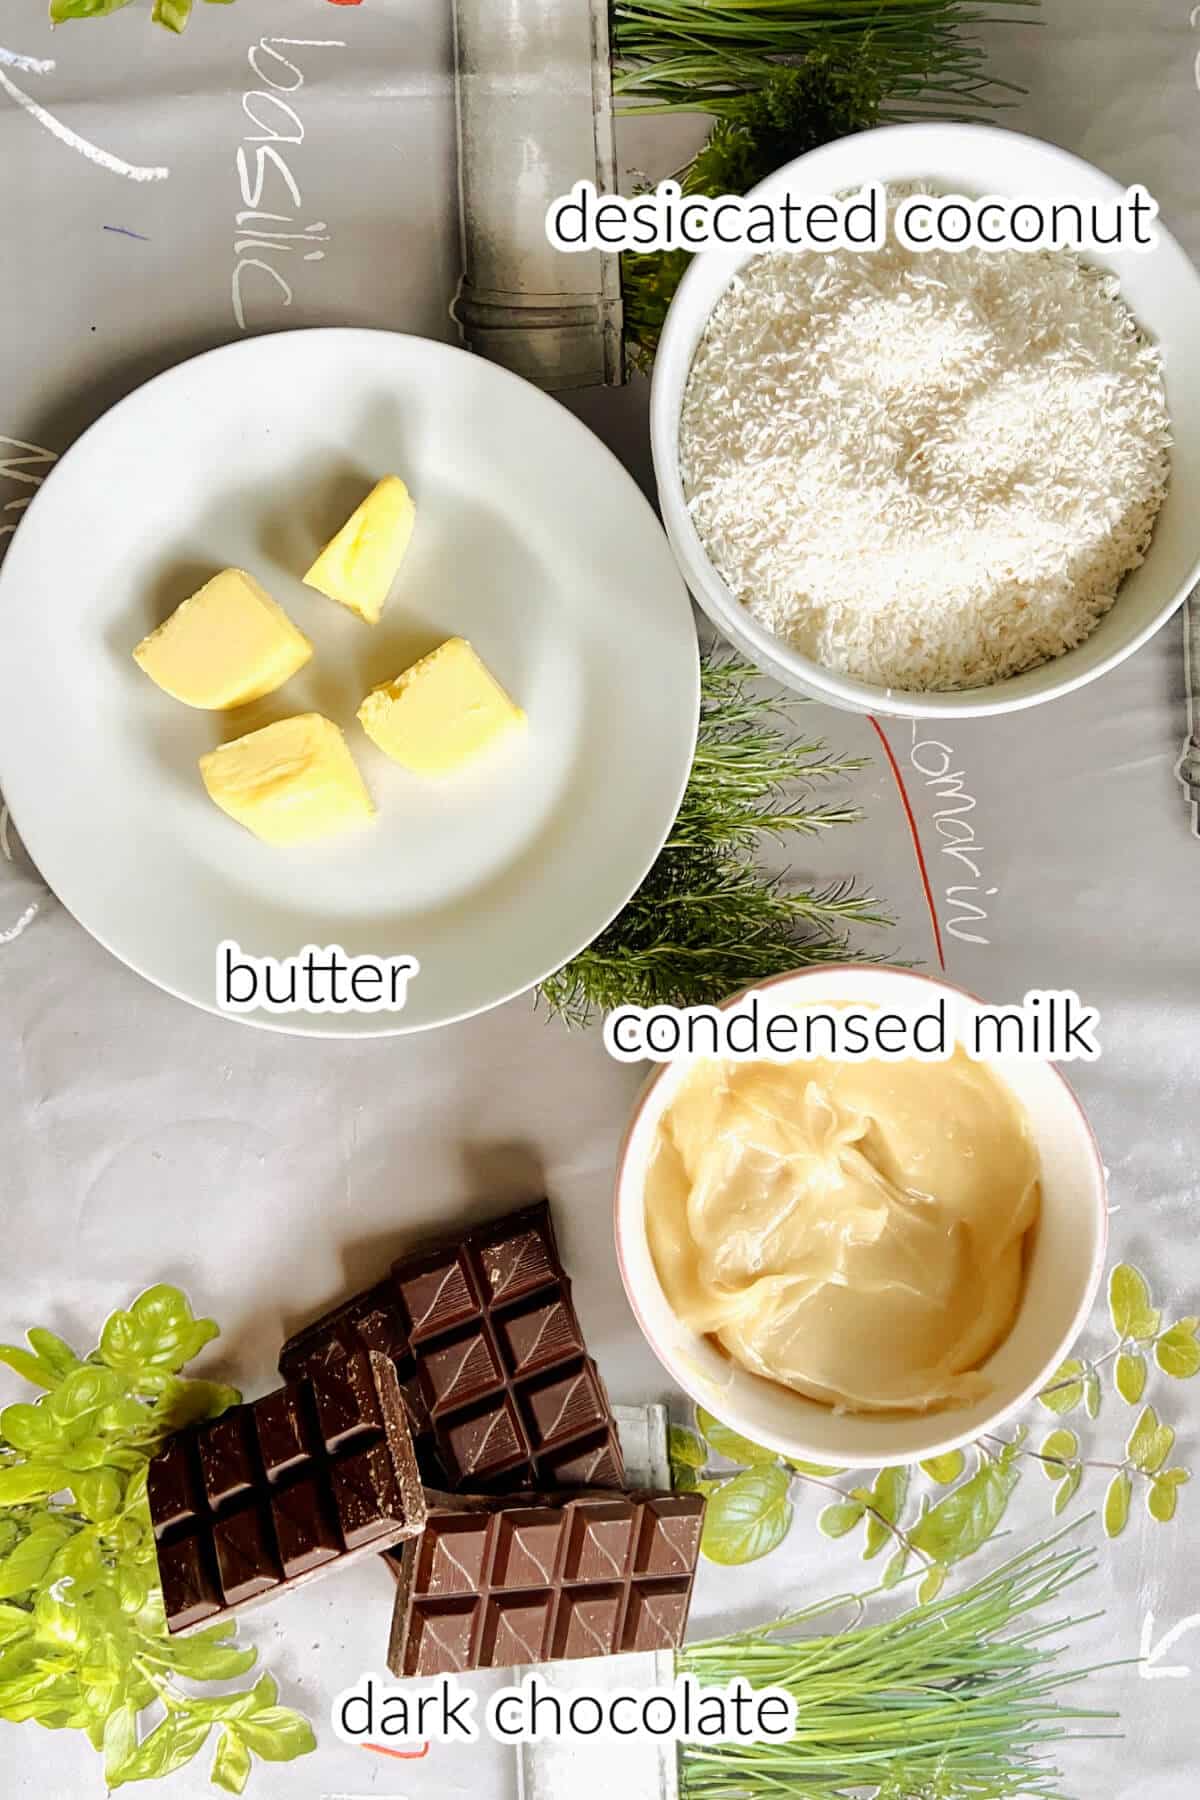 Ingredients needed to make coconut balls.